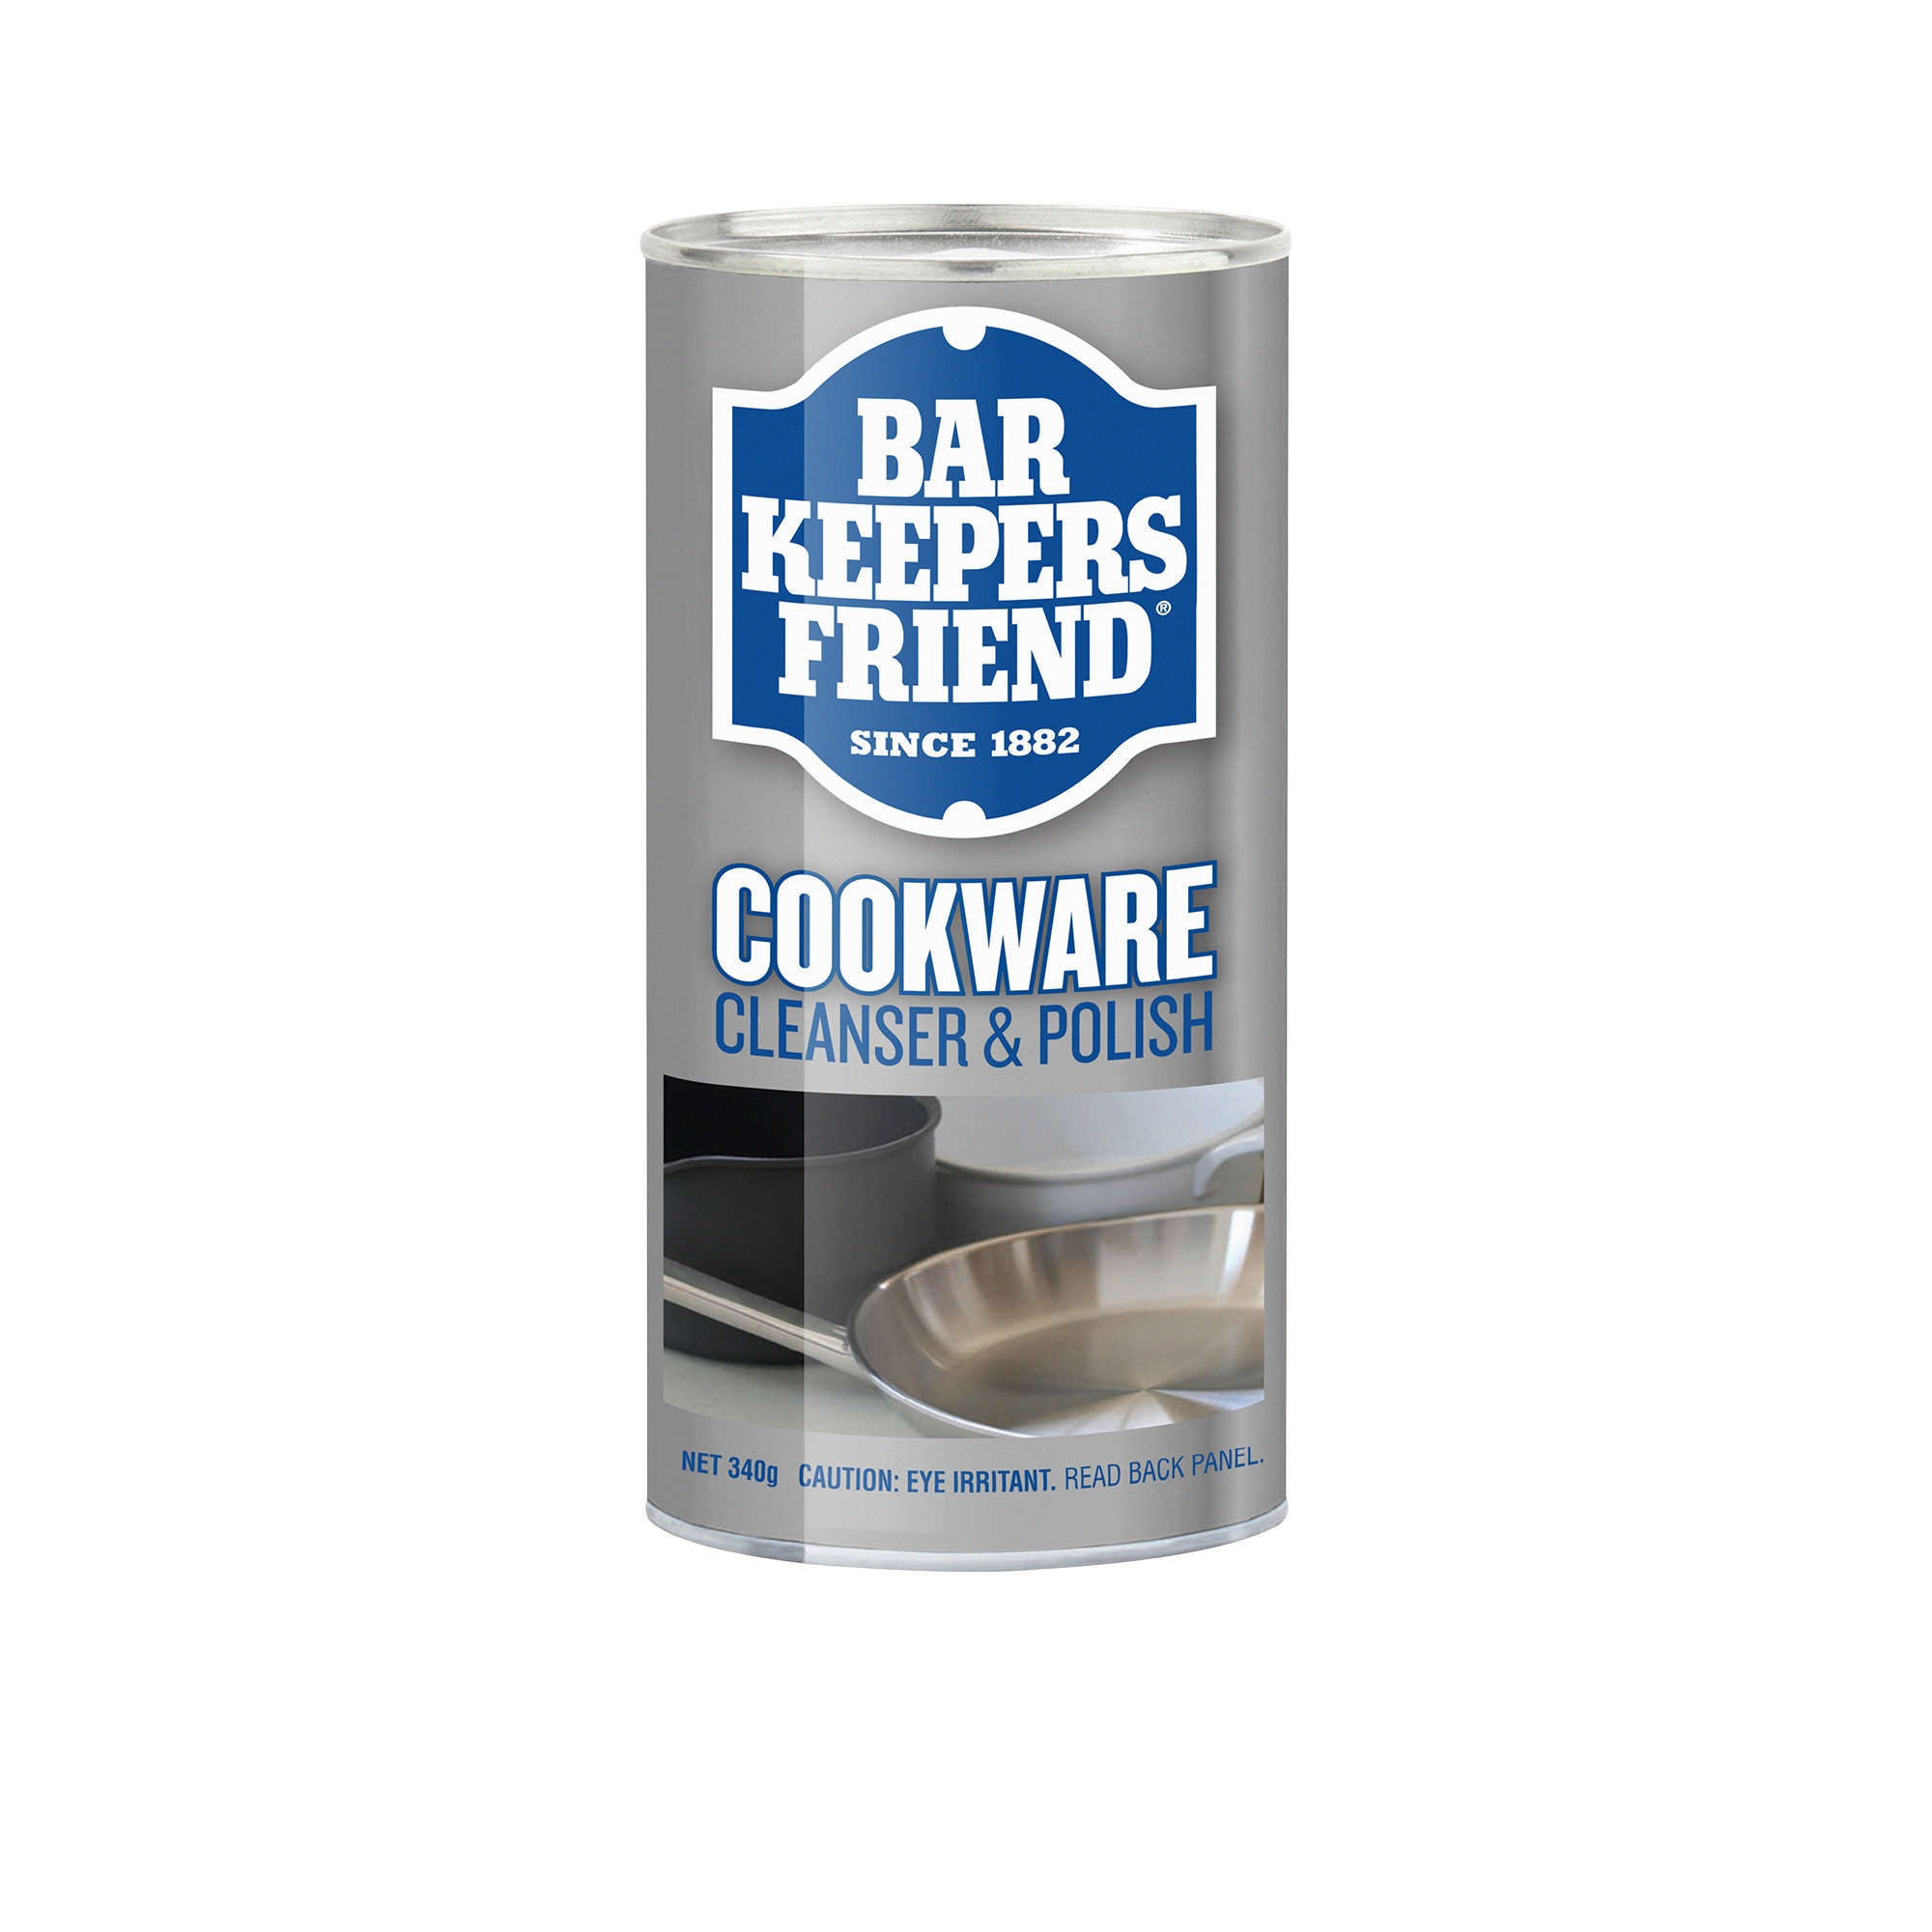 Bar Keepers Friend Cookware Cleaner 340g Image 1